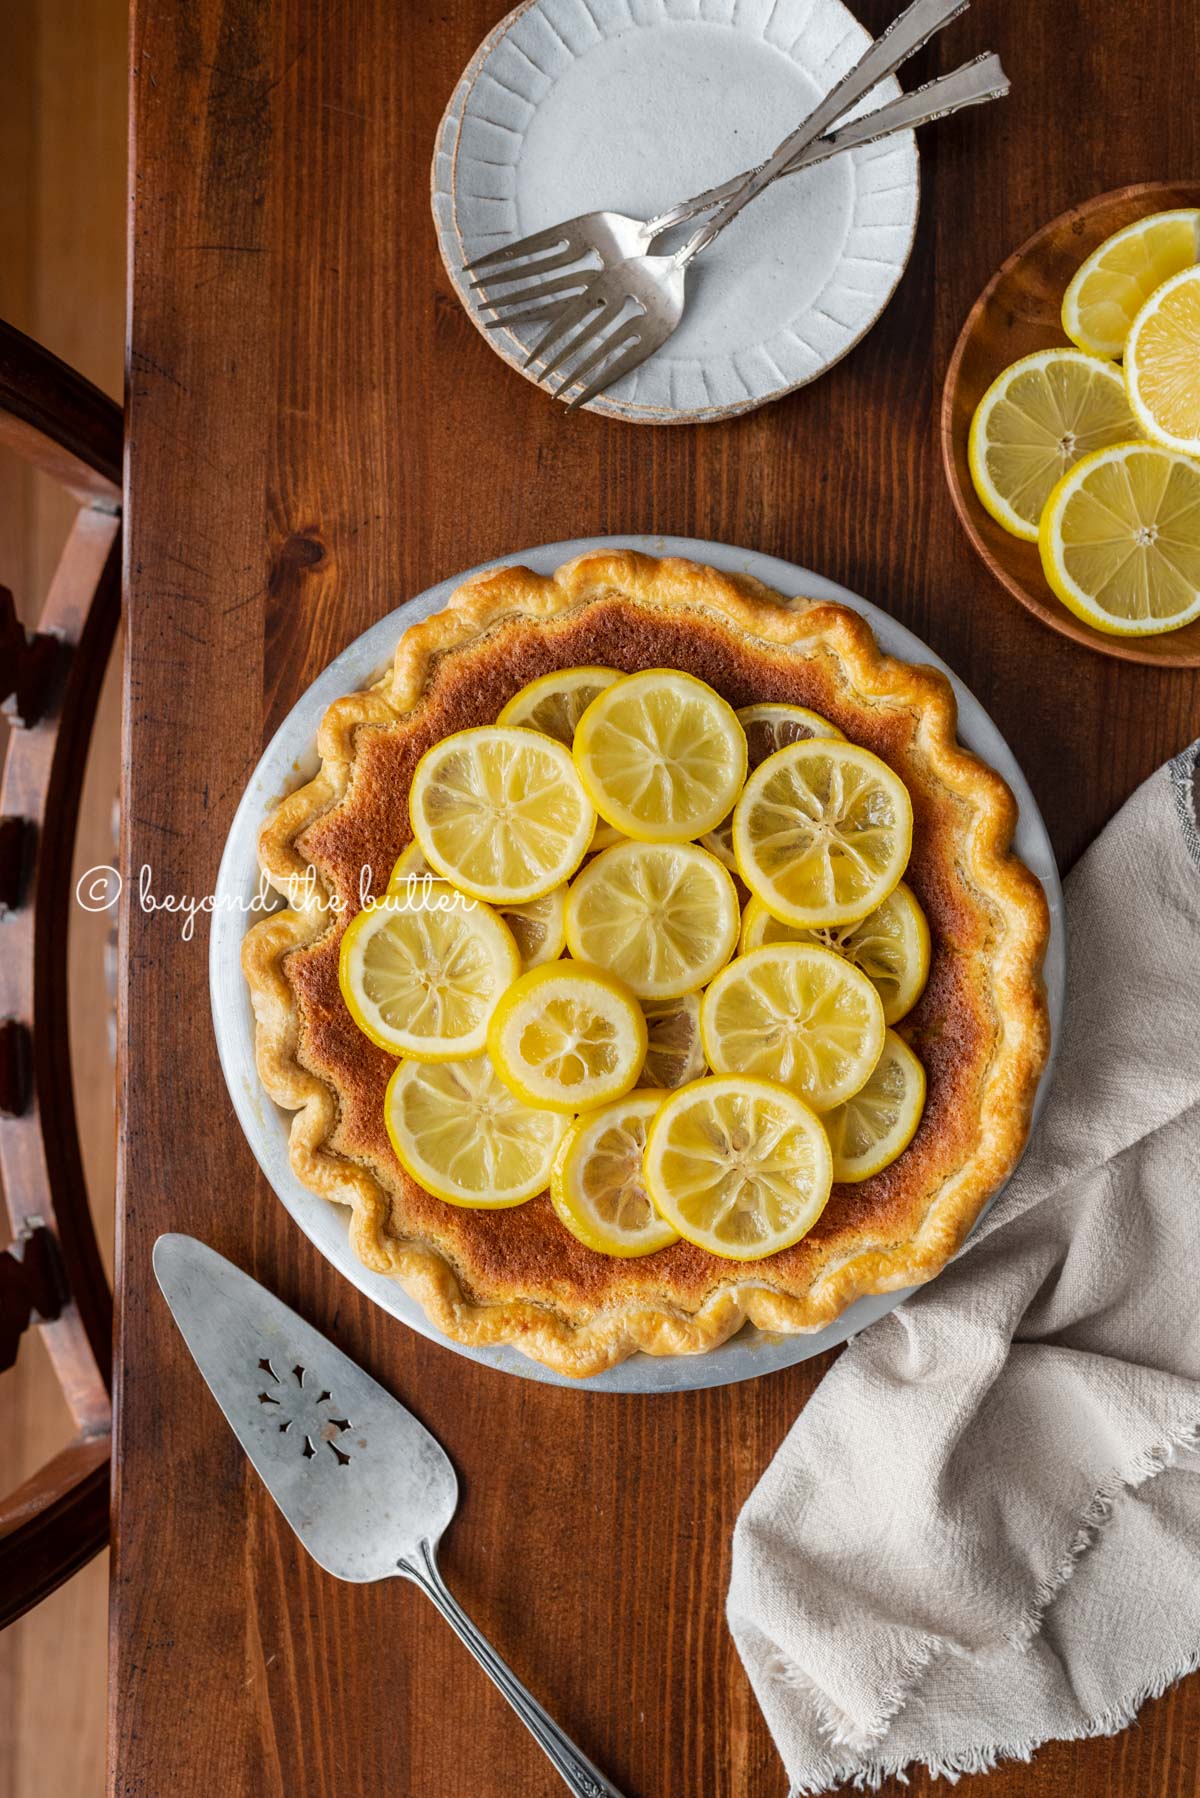 lemon sponge pie decorated with candied lemon sliced on a dark wood background with small dessert plates, napking, pie server, and small plate of sliced lemons | All images © Beyond the Butter®